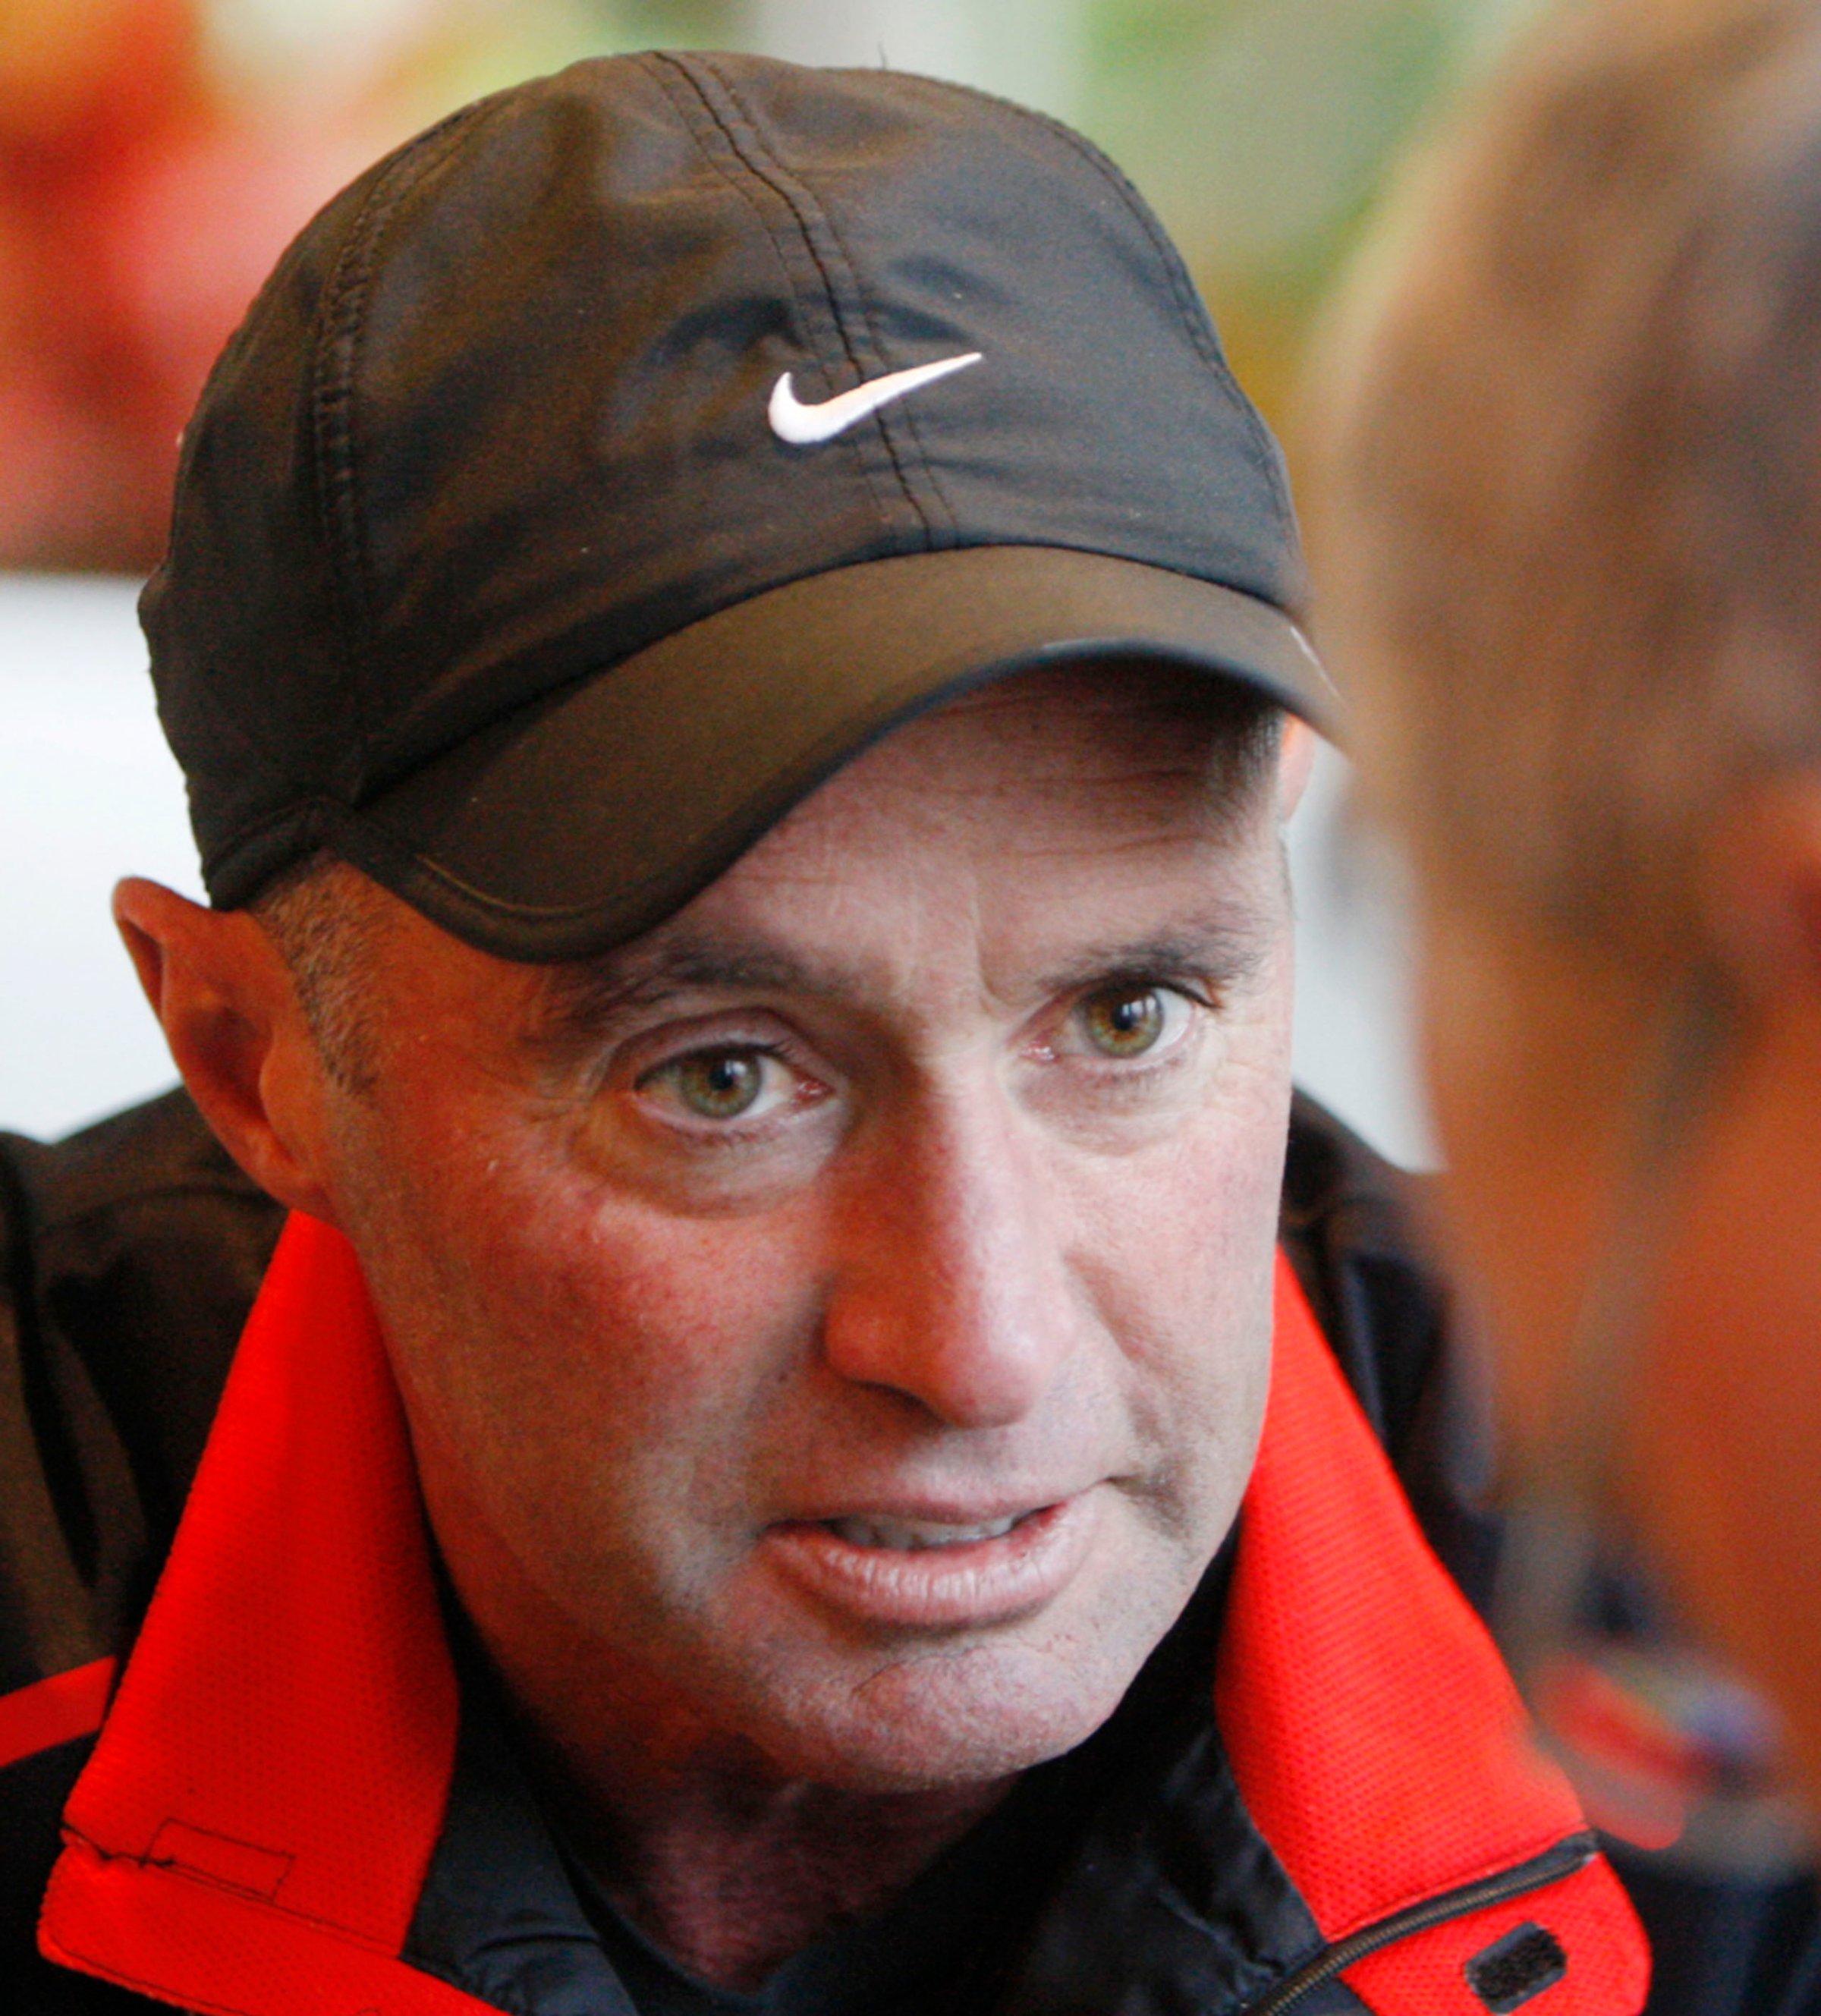 Alberto Salazar, the 1982 Boston Marathon winner, speaks to the Associated Press prior to joining John Hancock employees for a "Chat with the champions" event on Feb. 2, 2012, in Boston.